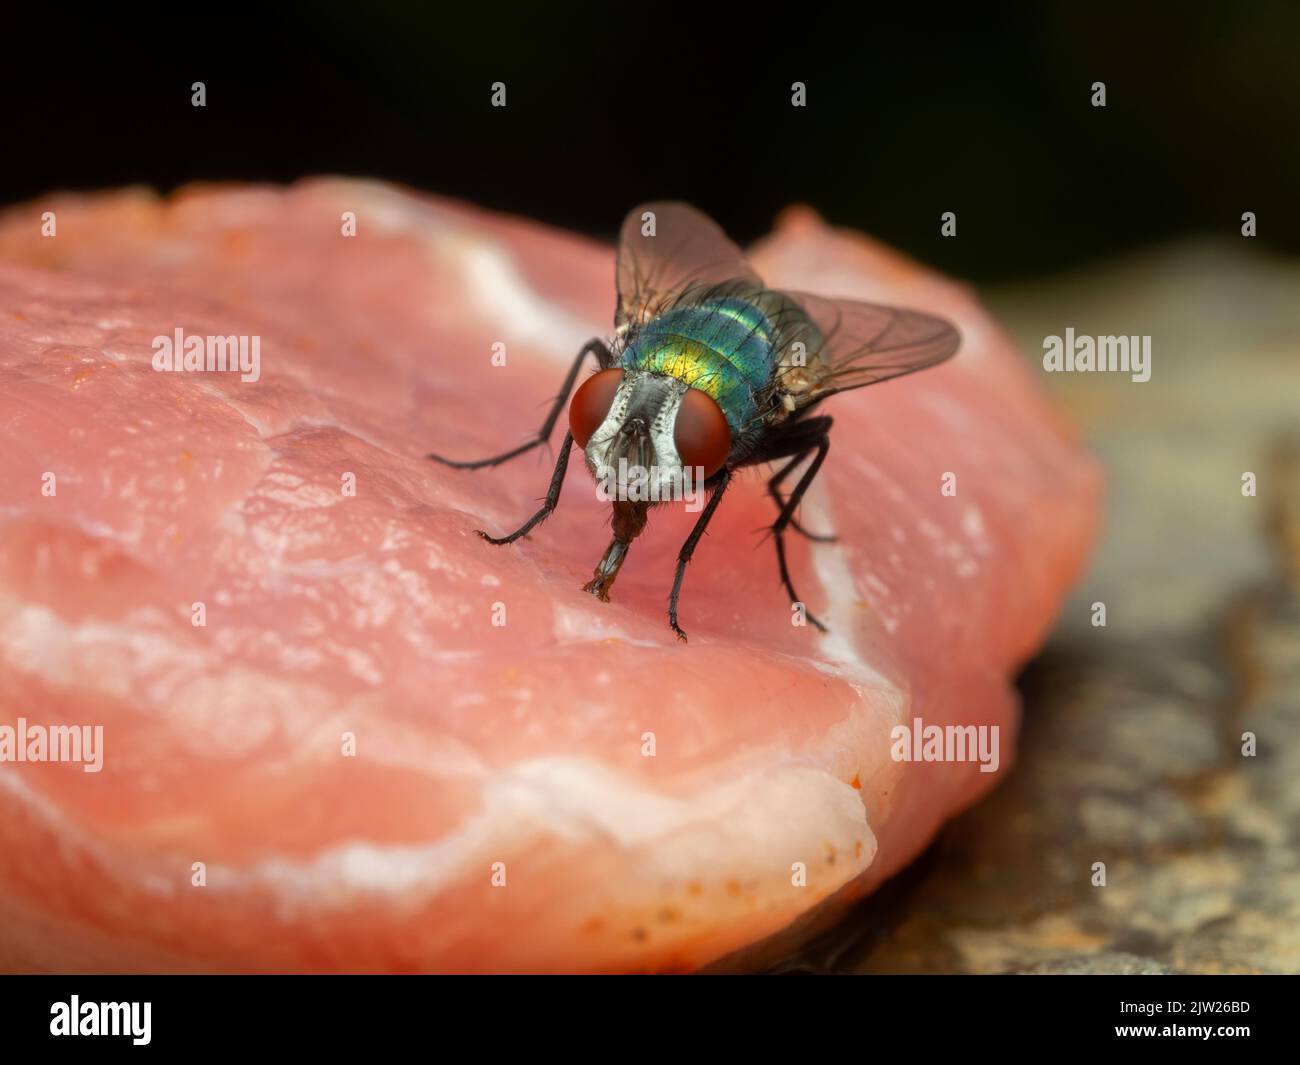 Colorful greenbottle blowfly, Lucilia sericata, facing the camera with beautiful red eyes, feeding on a piece of raw meat Stock Photo